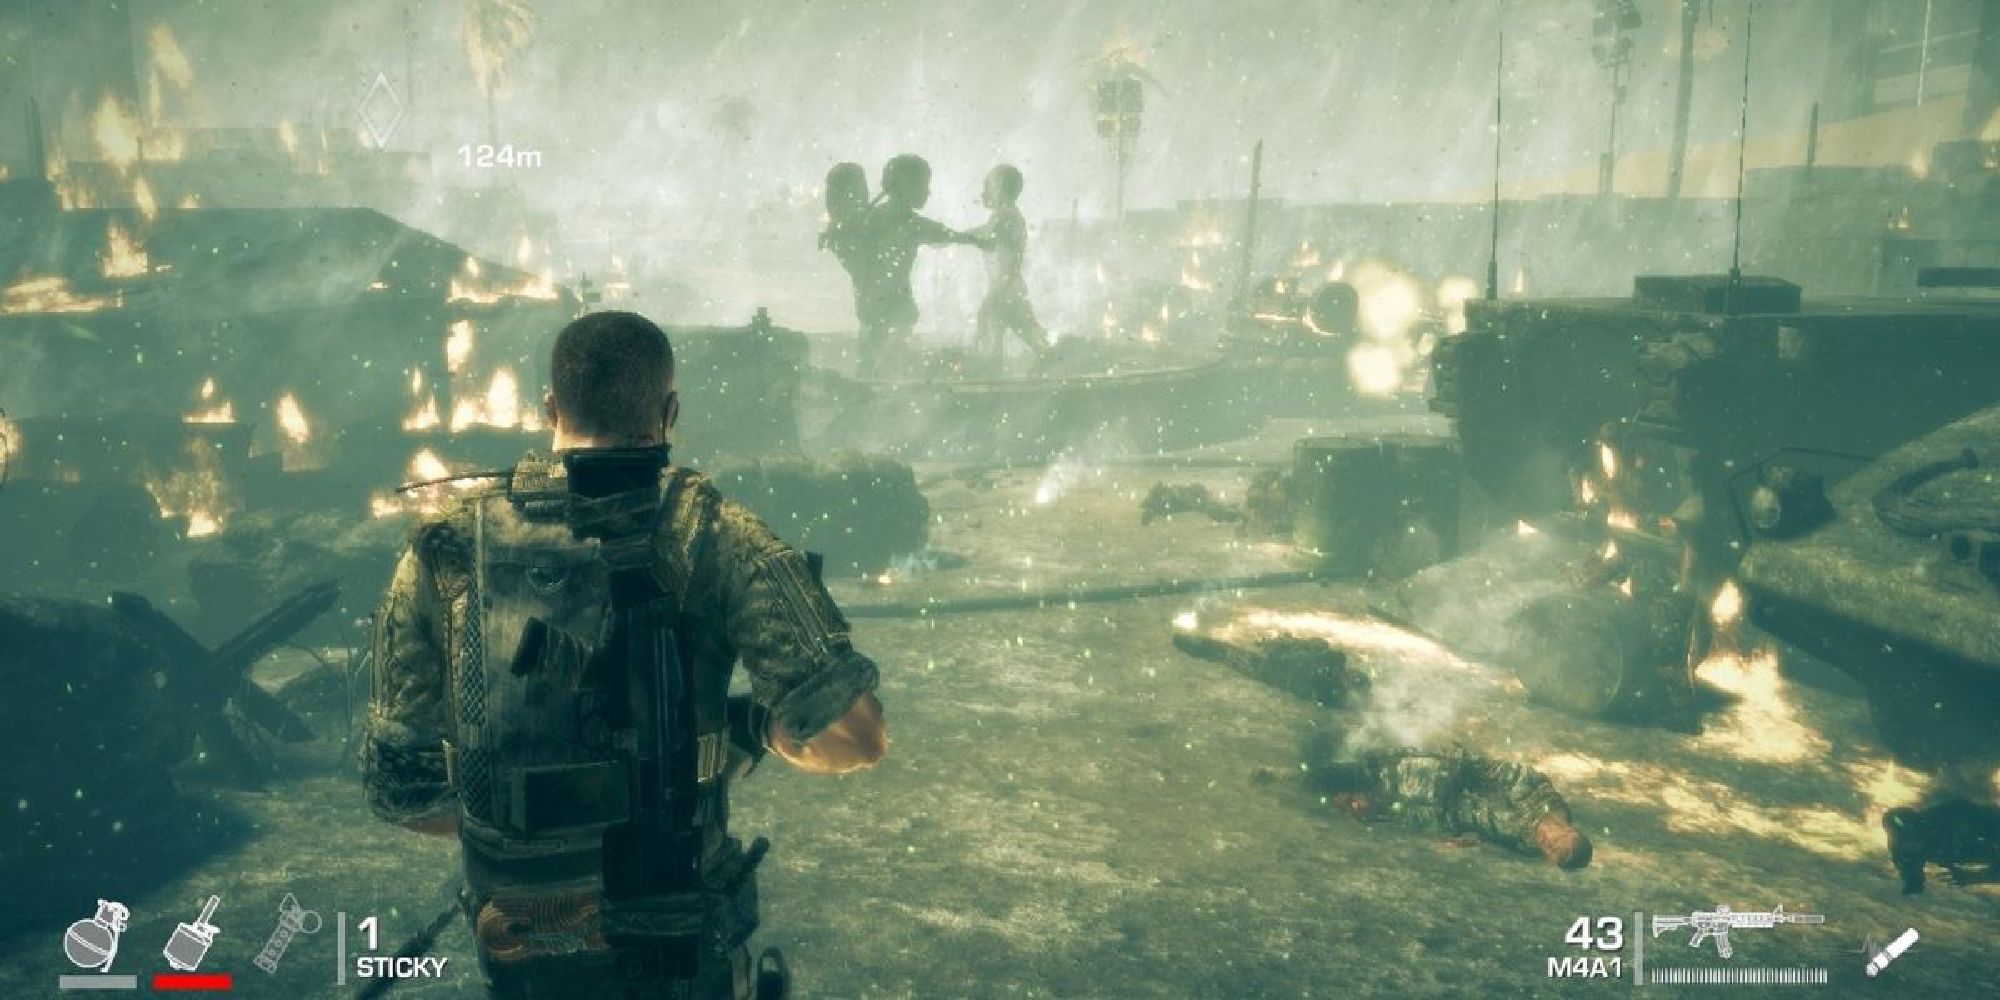 spec ops the line white phosphorous scene with bodies and fire